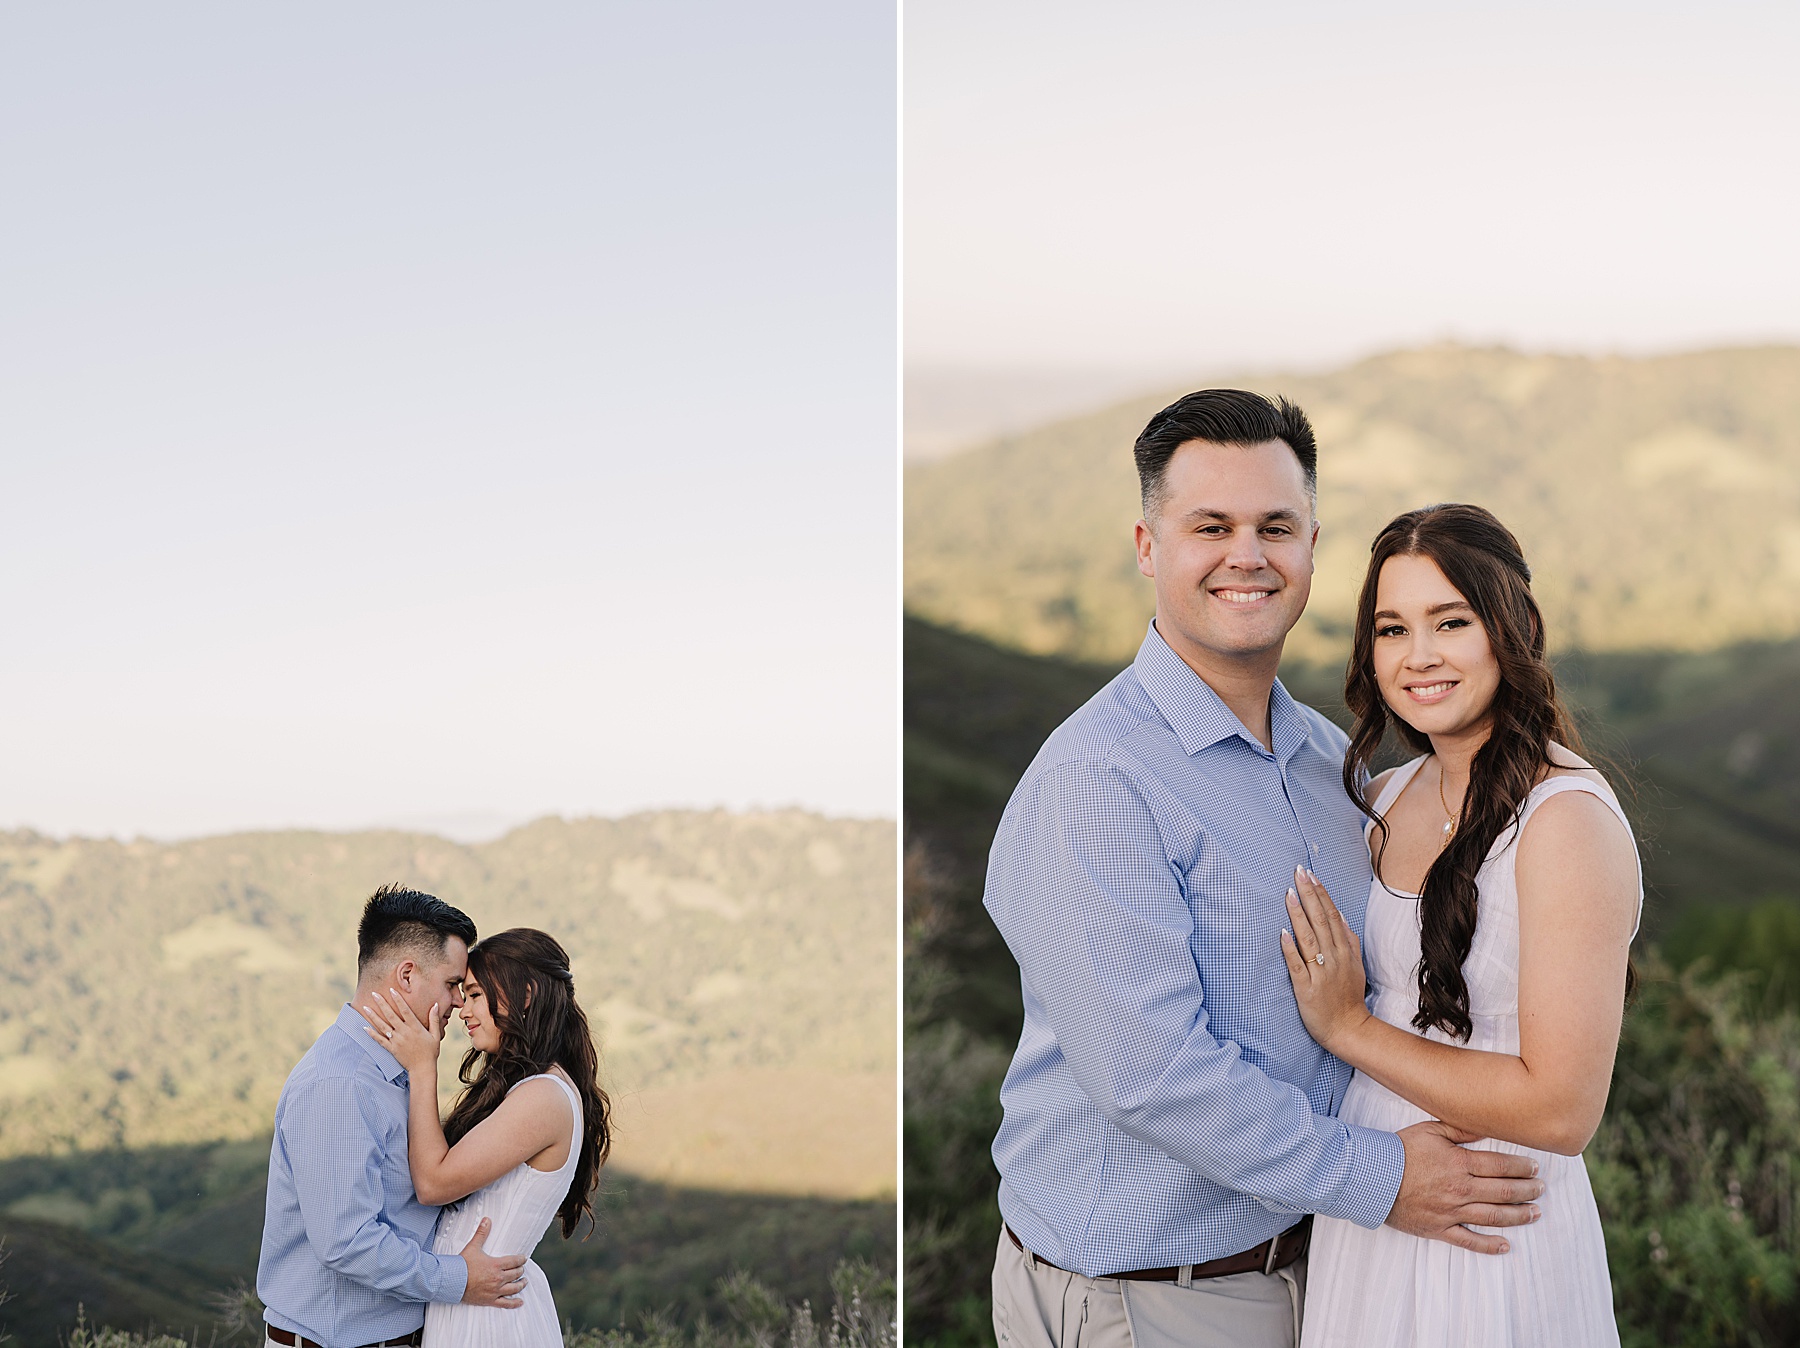 Nikkels Photography, a Central California Coast photographer, shares an engagement at Cuesta Ridge she was able to capture